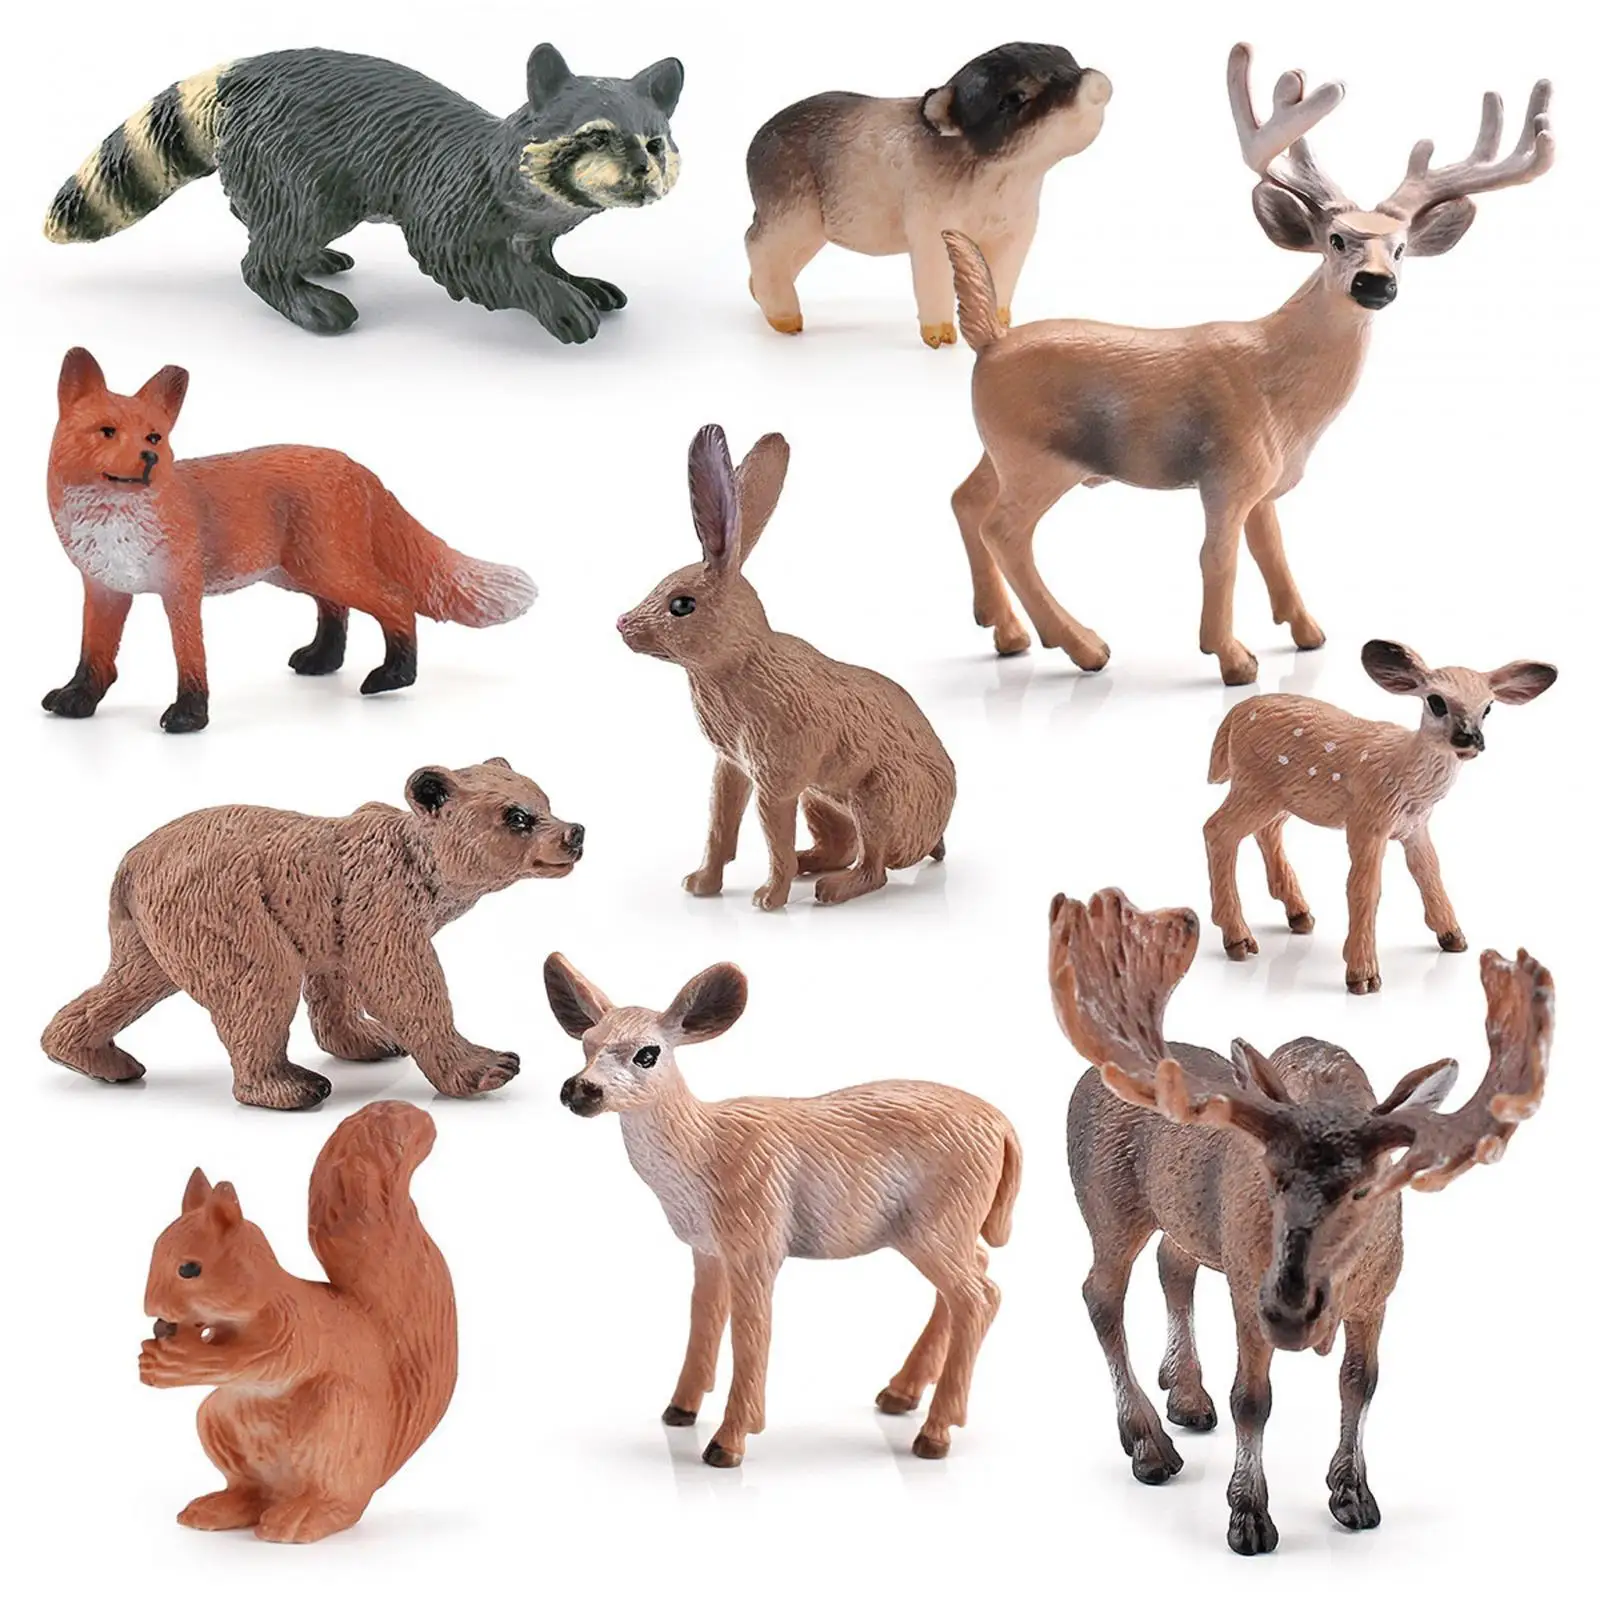 

10x Animals Figures Playset Zoo Animals Figurines for Tabletop Office